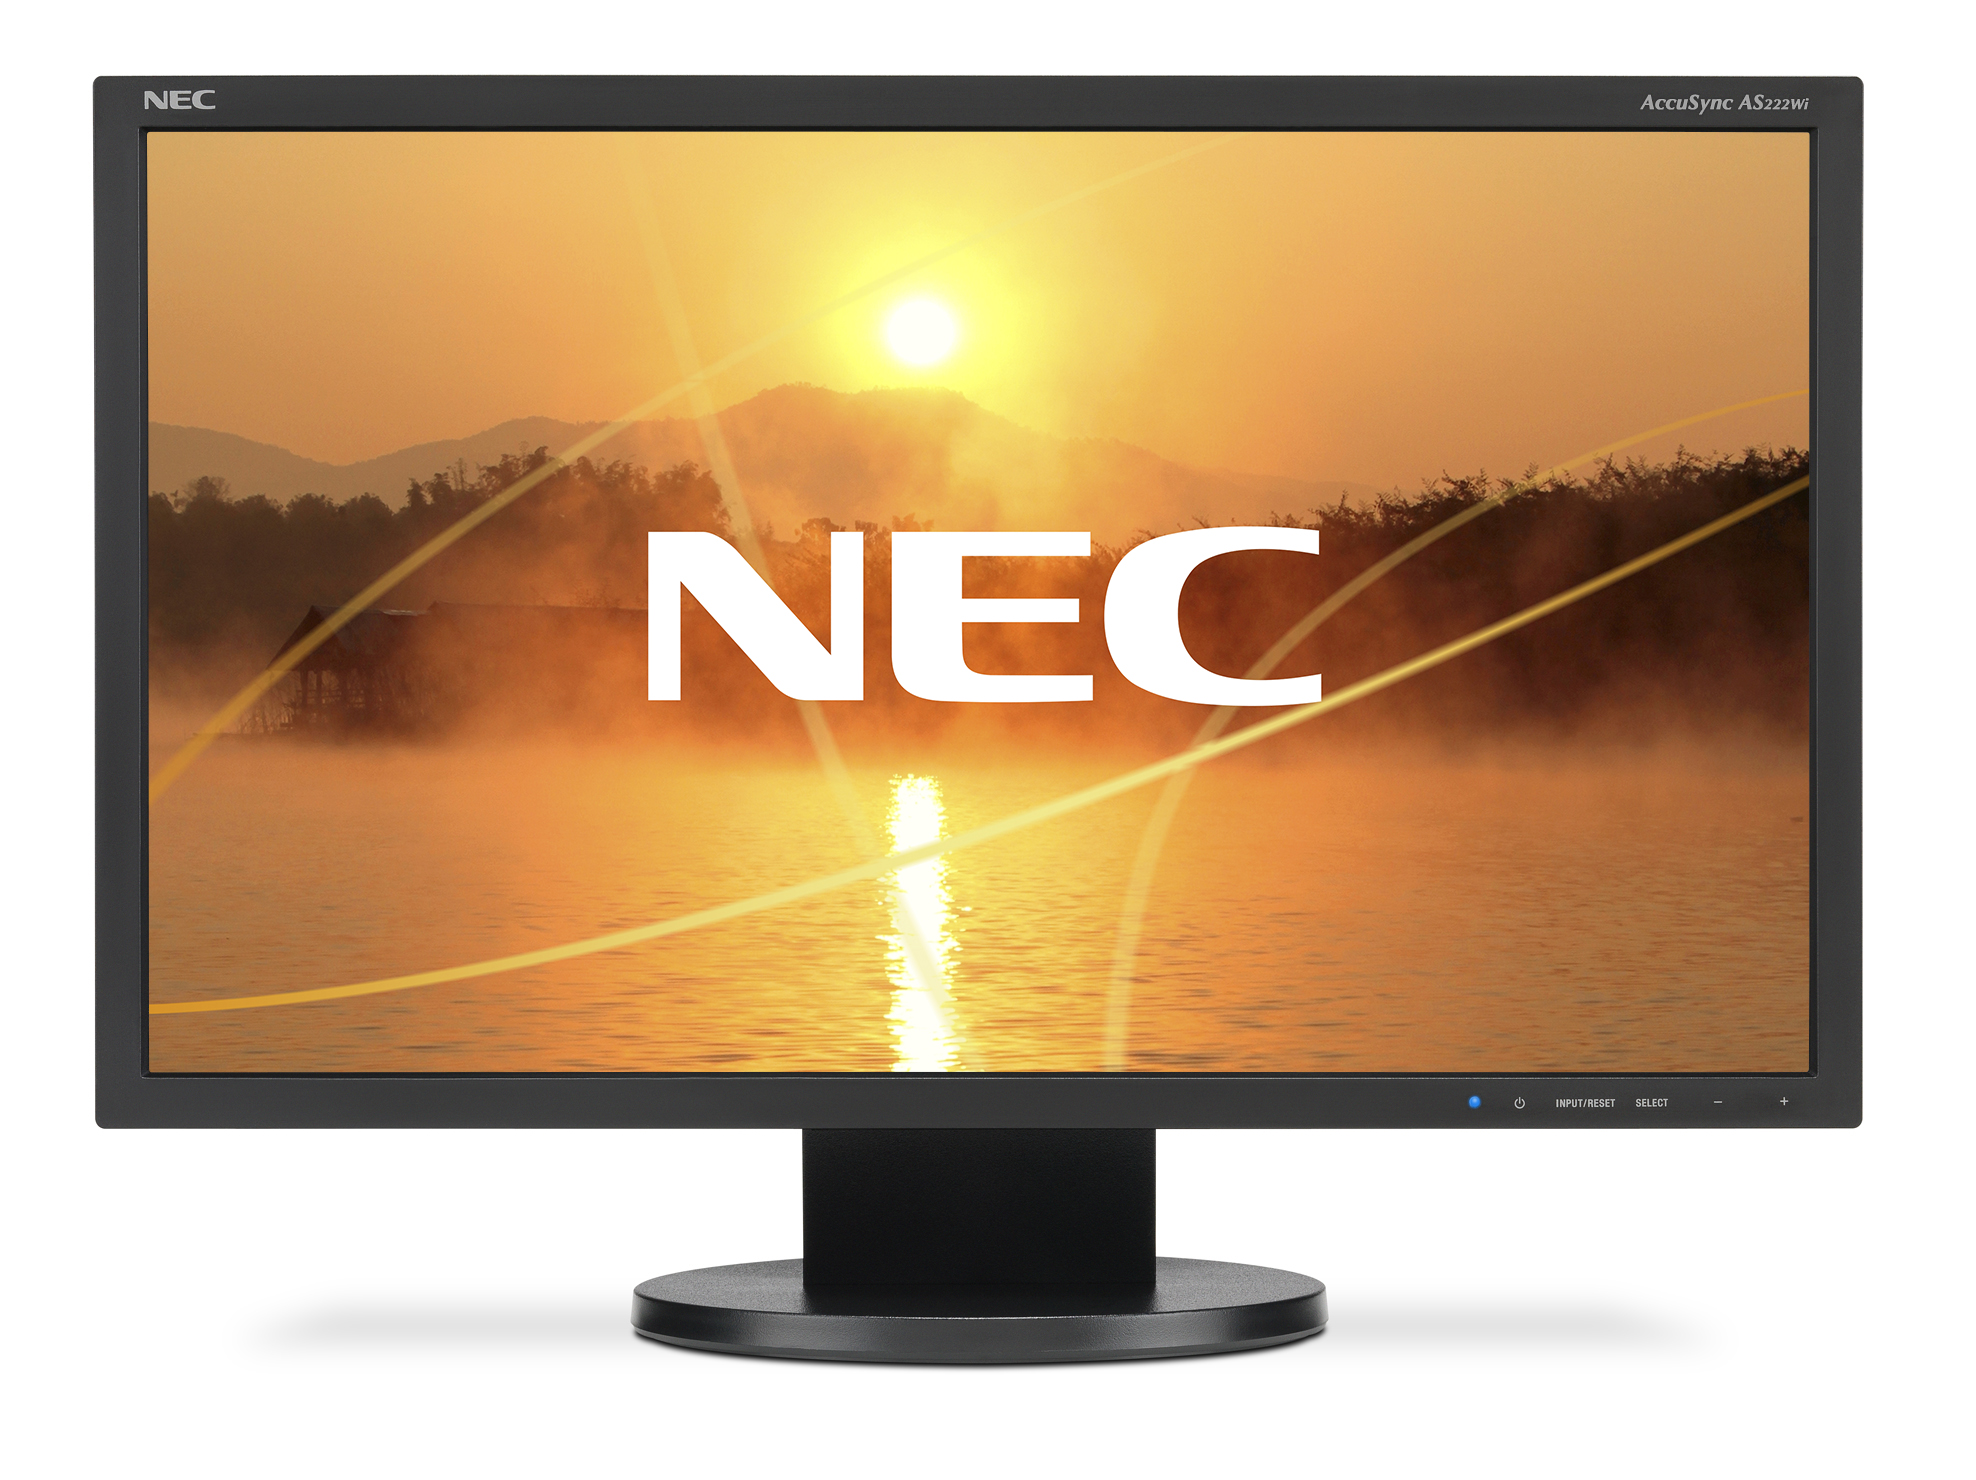 NEC AS222WI 21 5IN LCD monitor